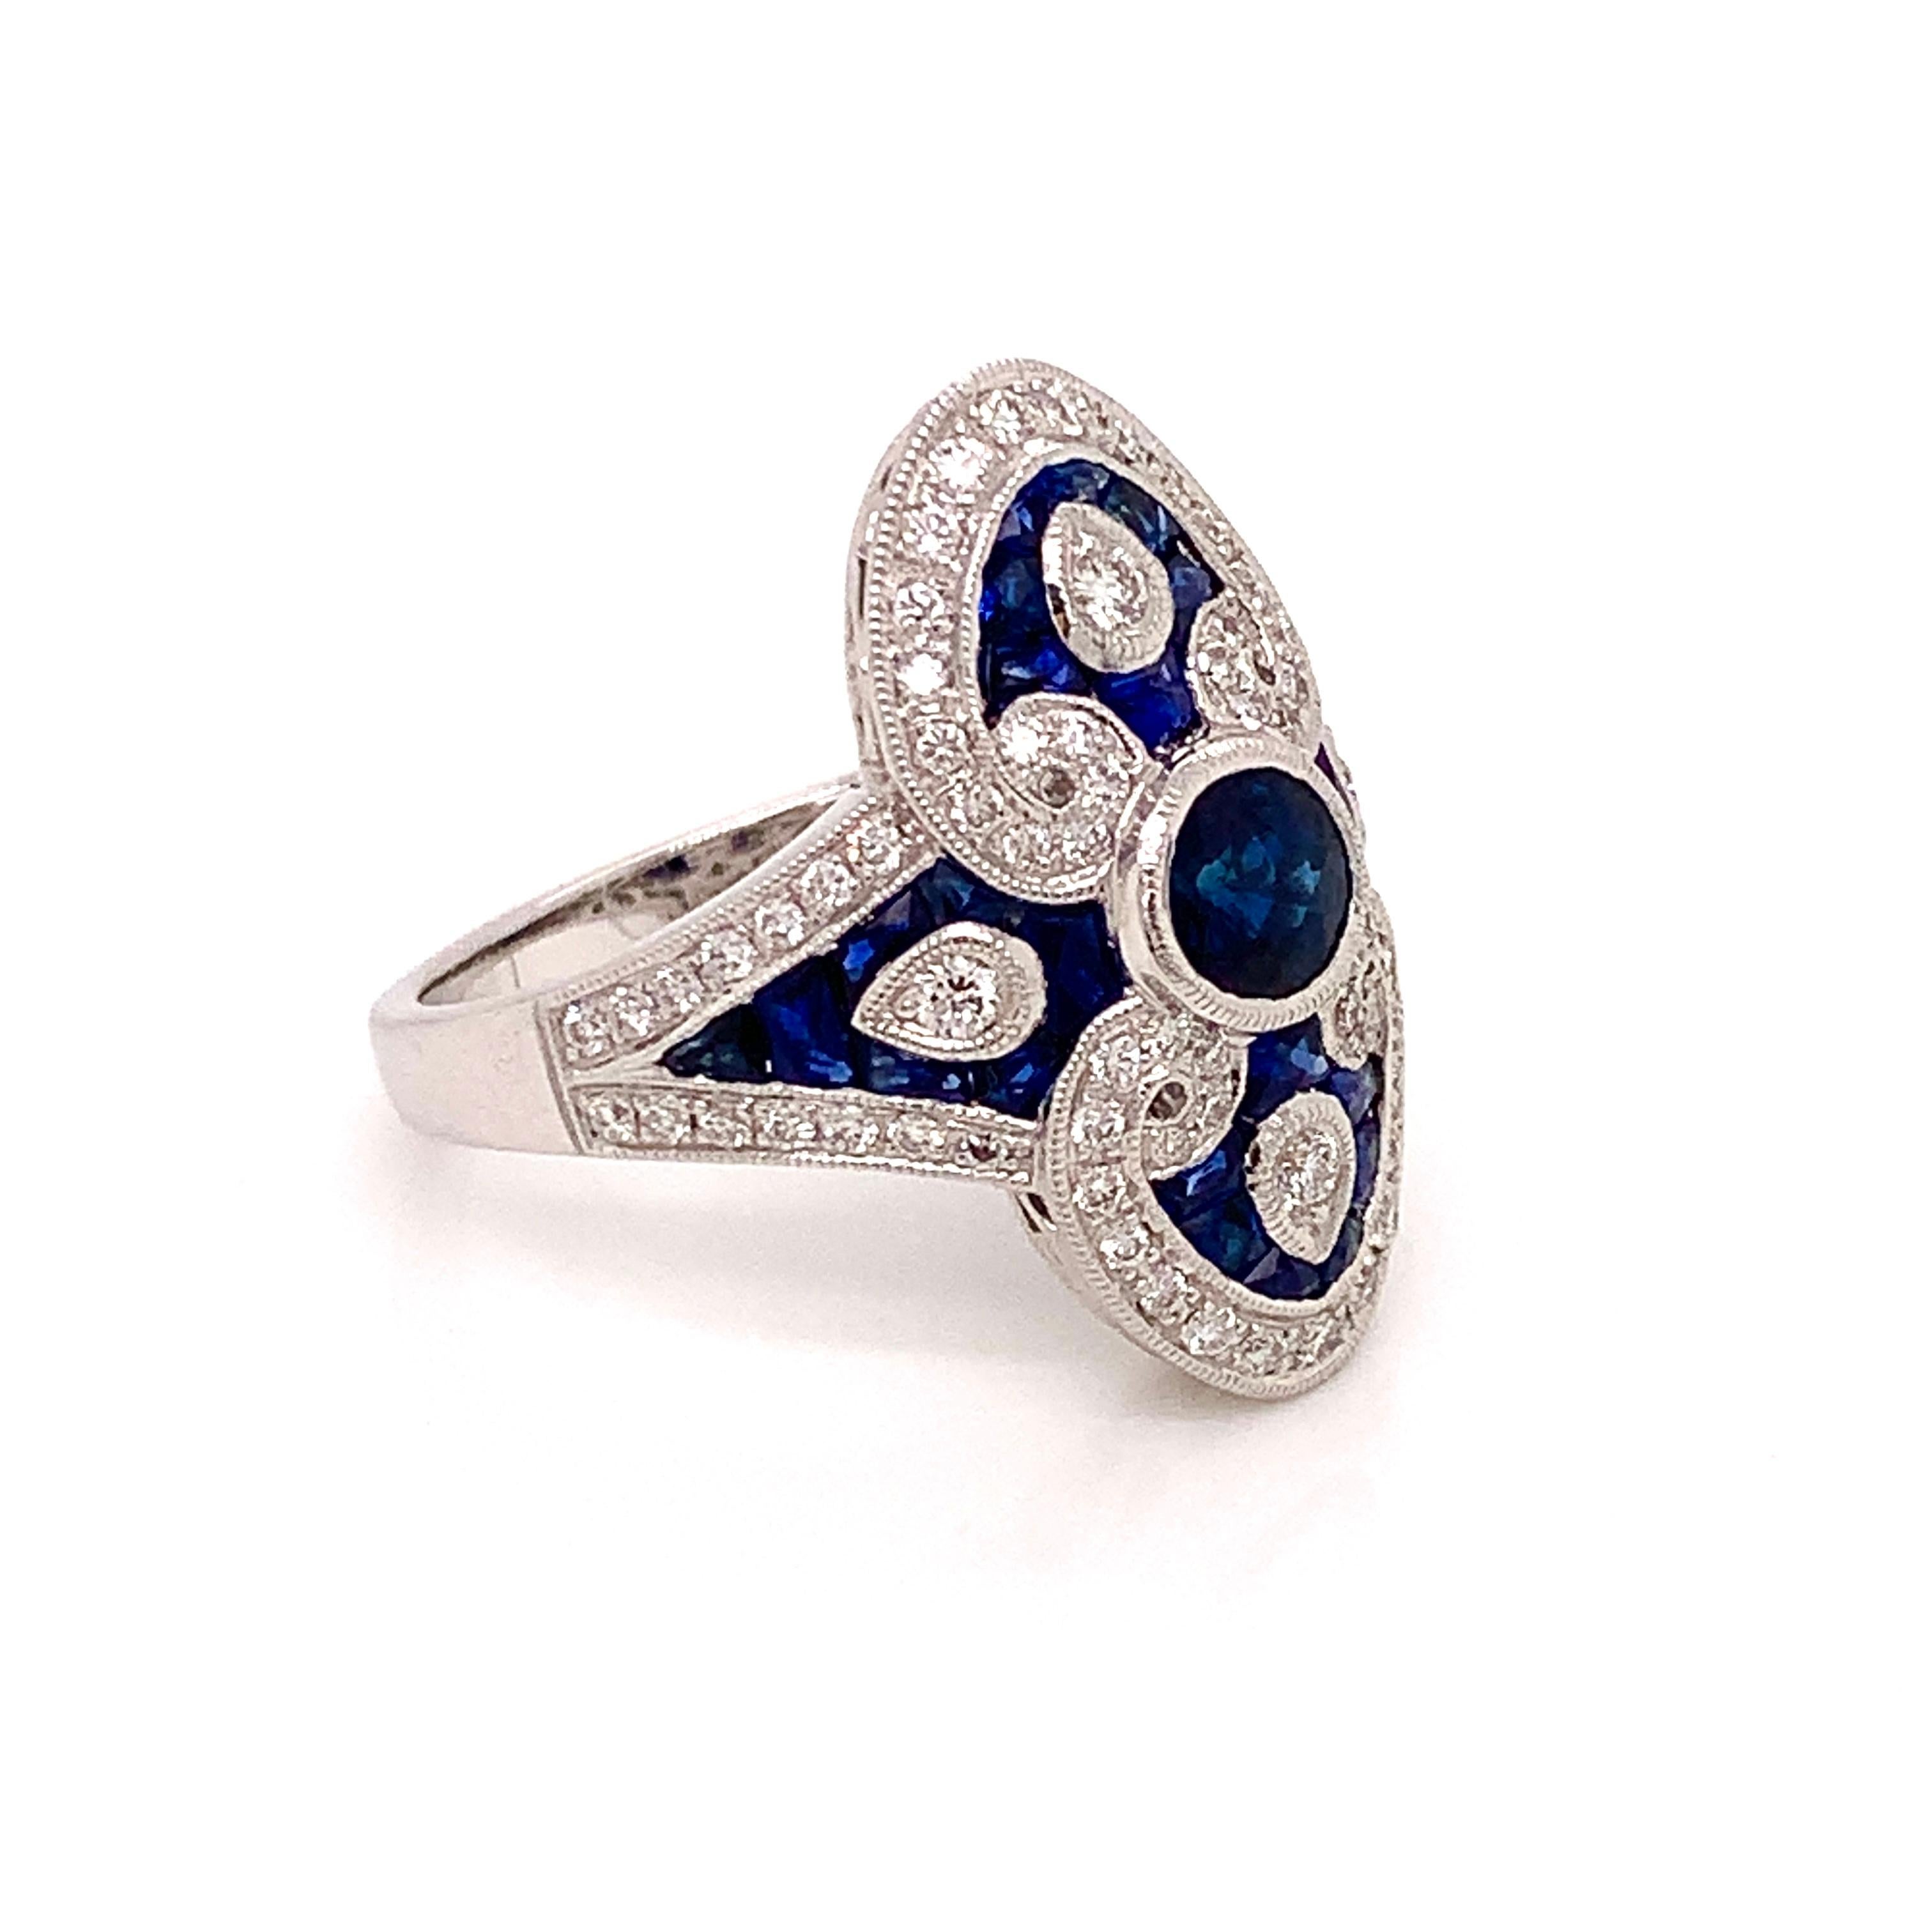 Contemporary Beverley K Vintage Inspired Sapphire and Diamond Ring